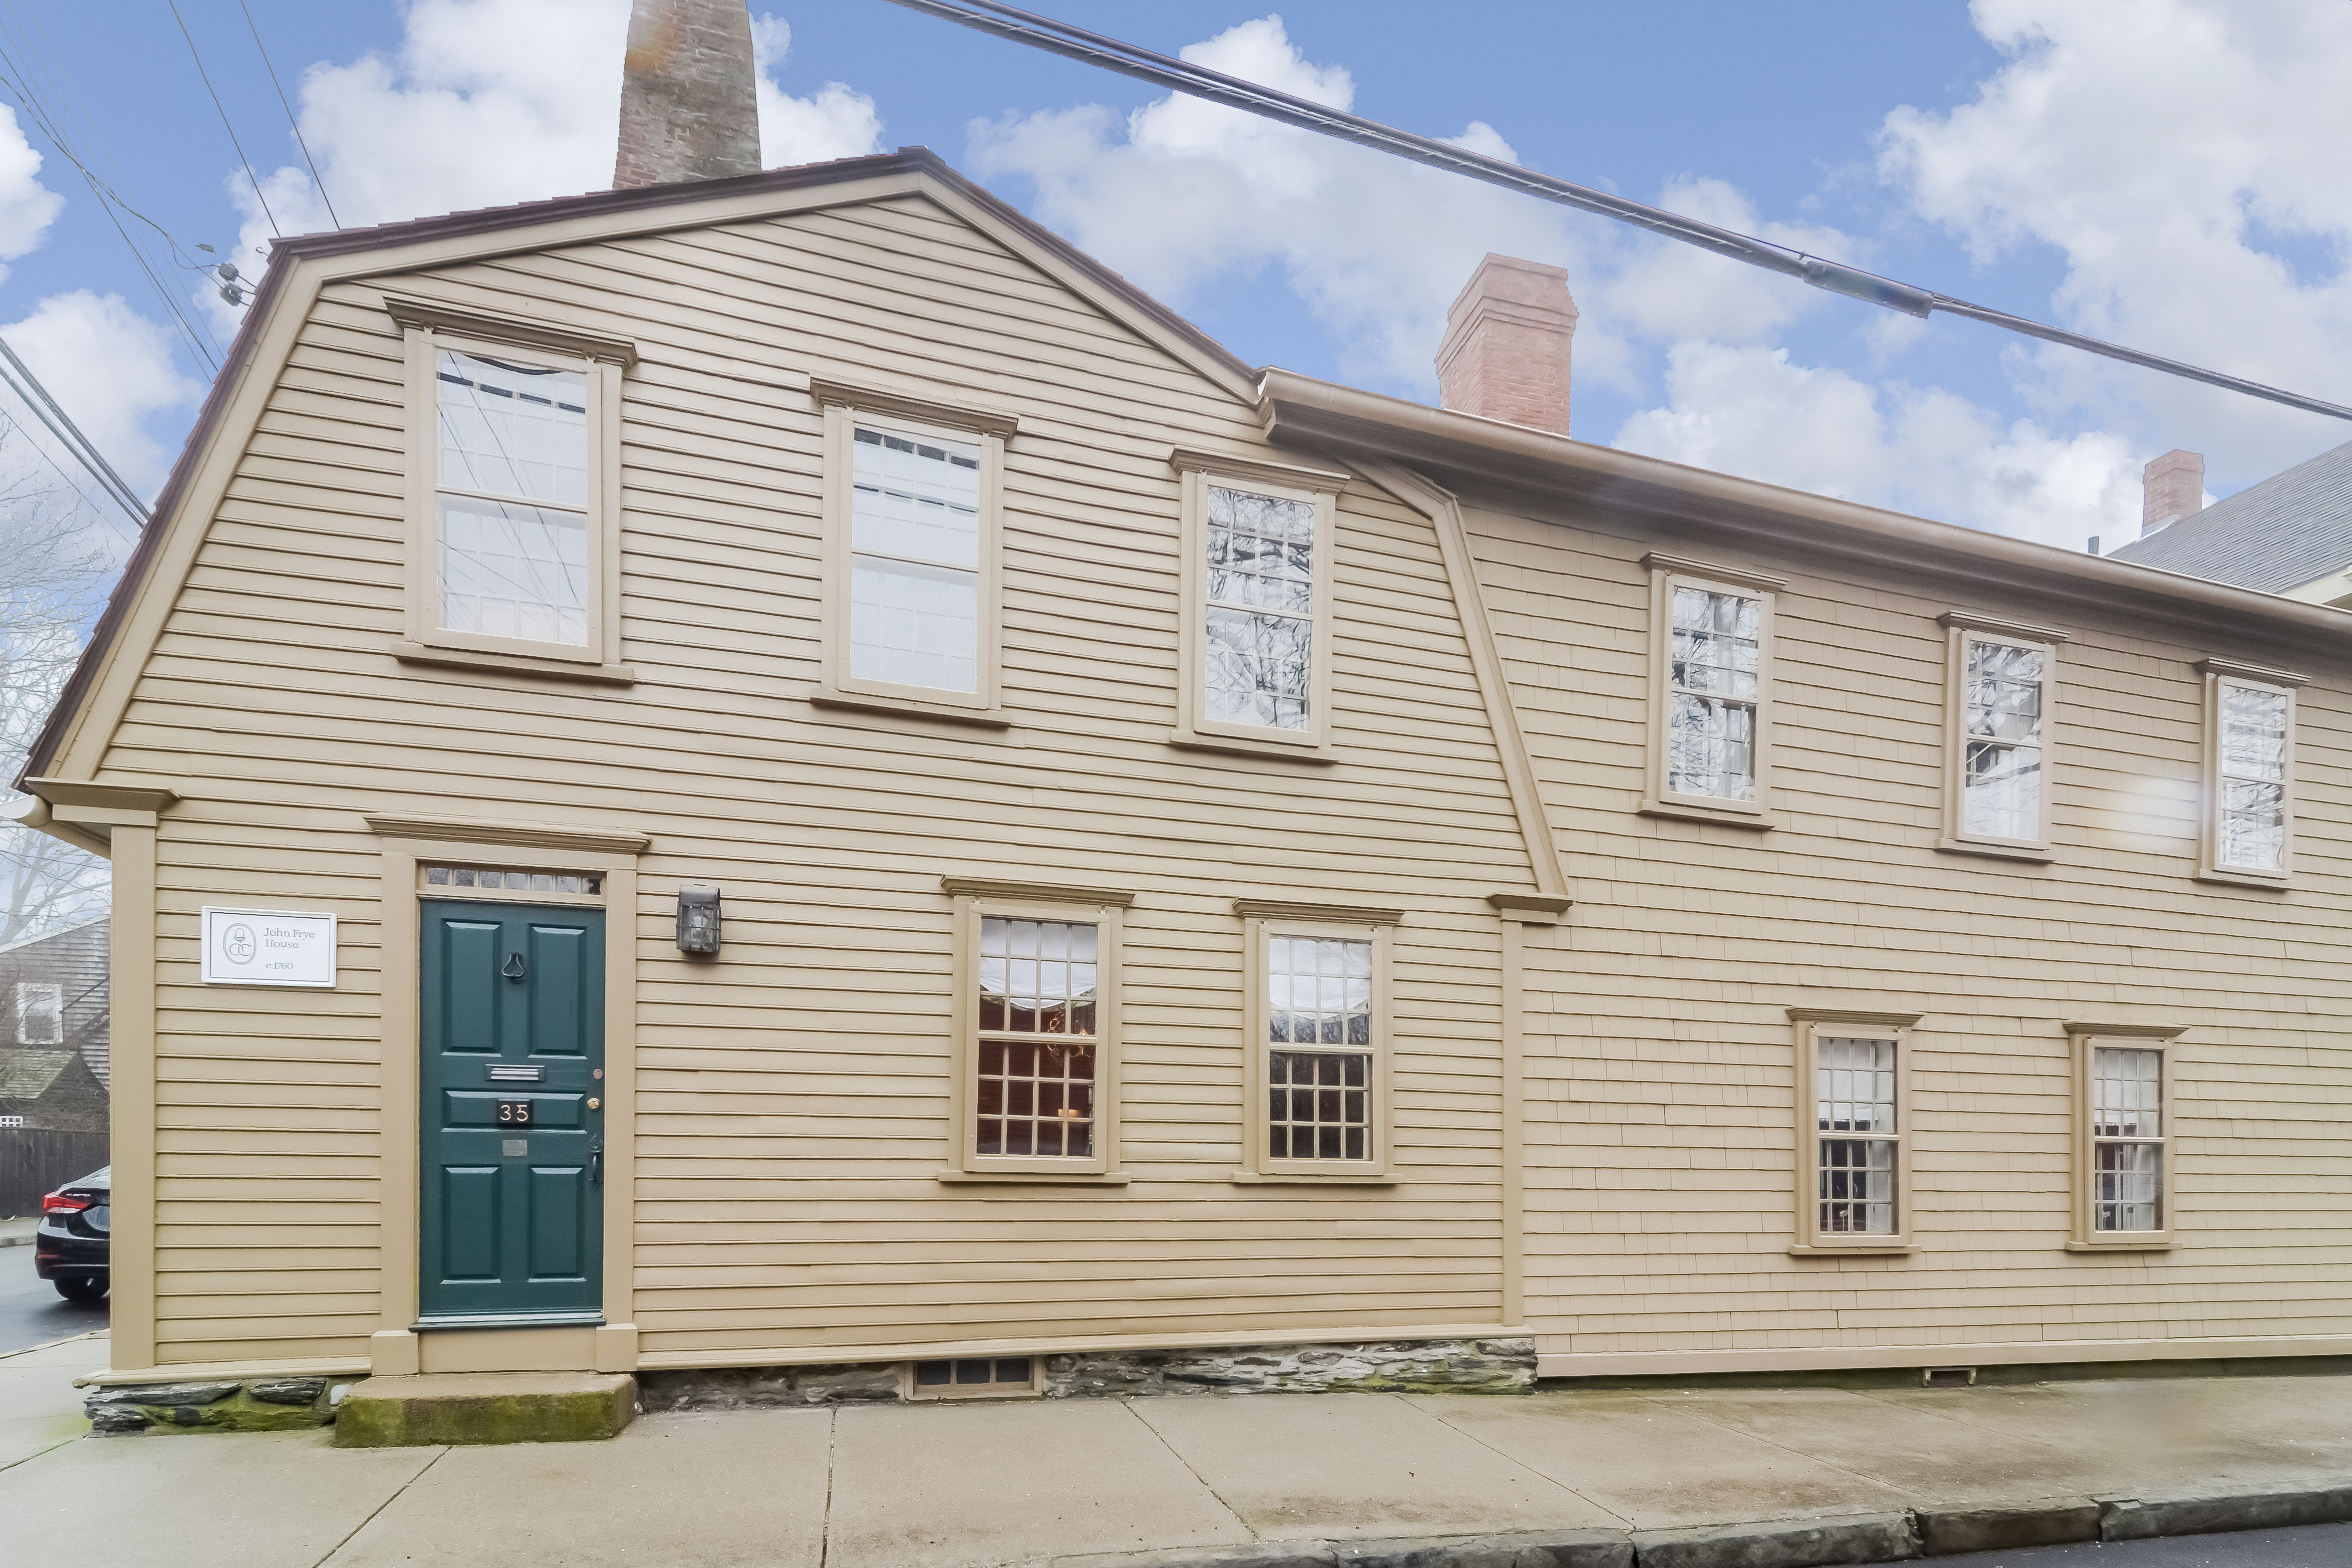 Historic Home in the Point Sells for $1.29M